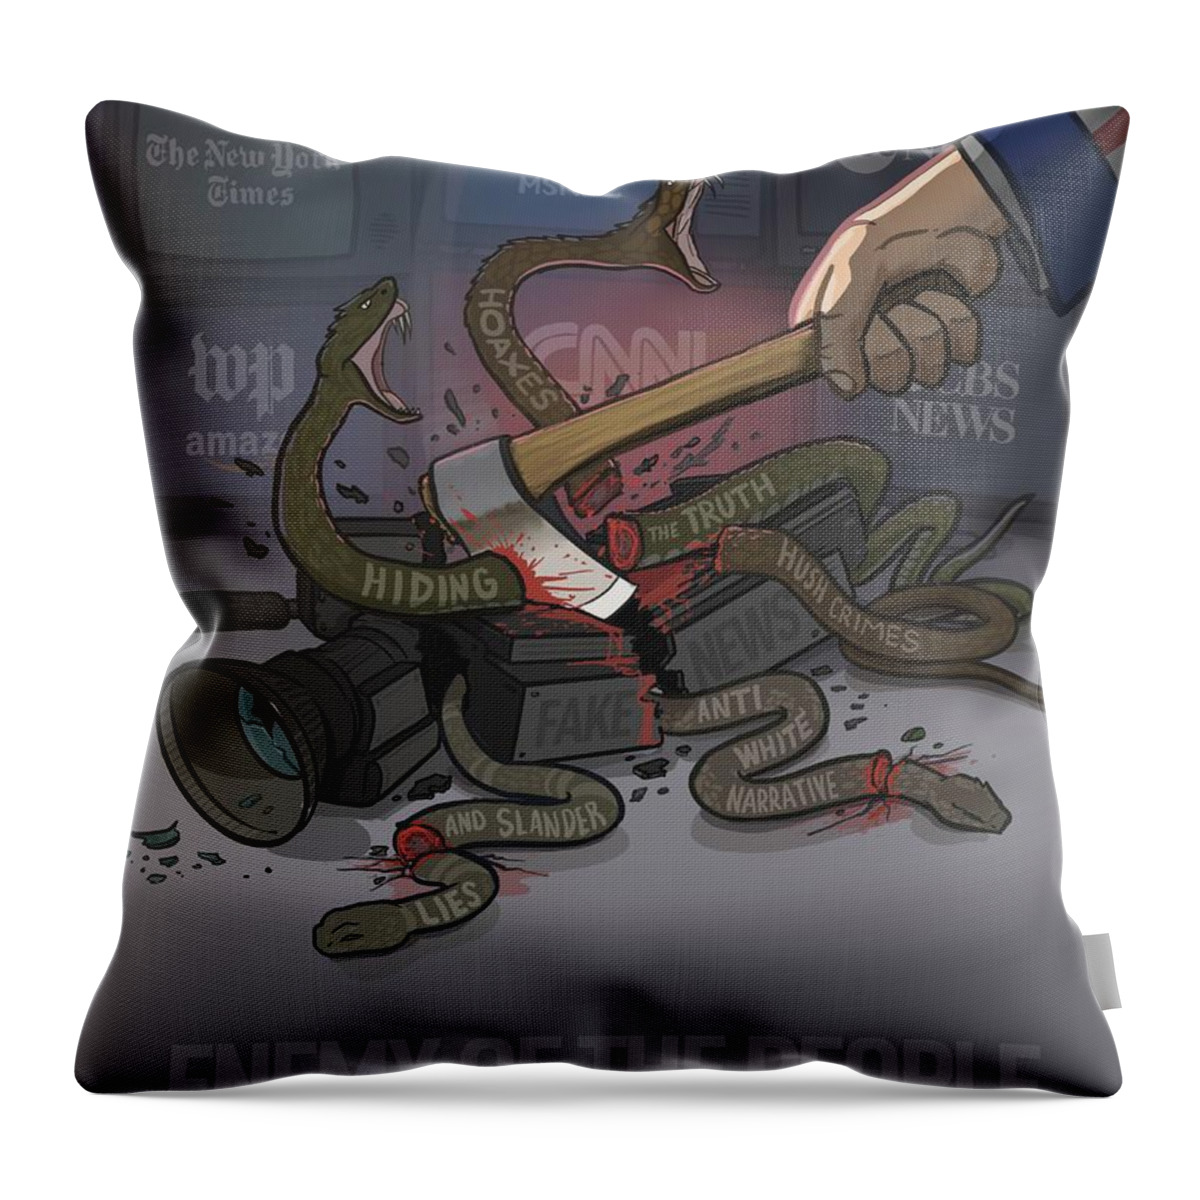 #enemyofthepeople #fakenews #msm Throw Pillow featuring the digital art Enemy of the People by Emerson Design